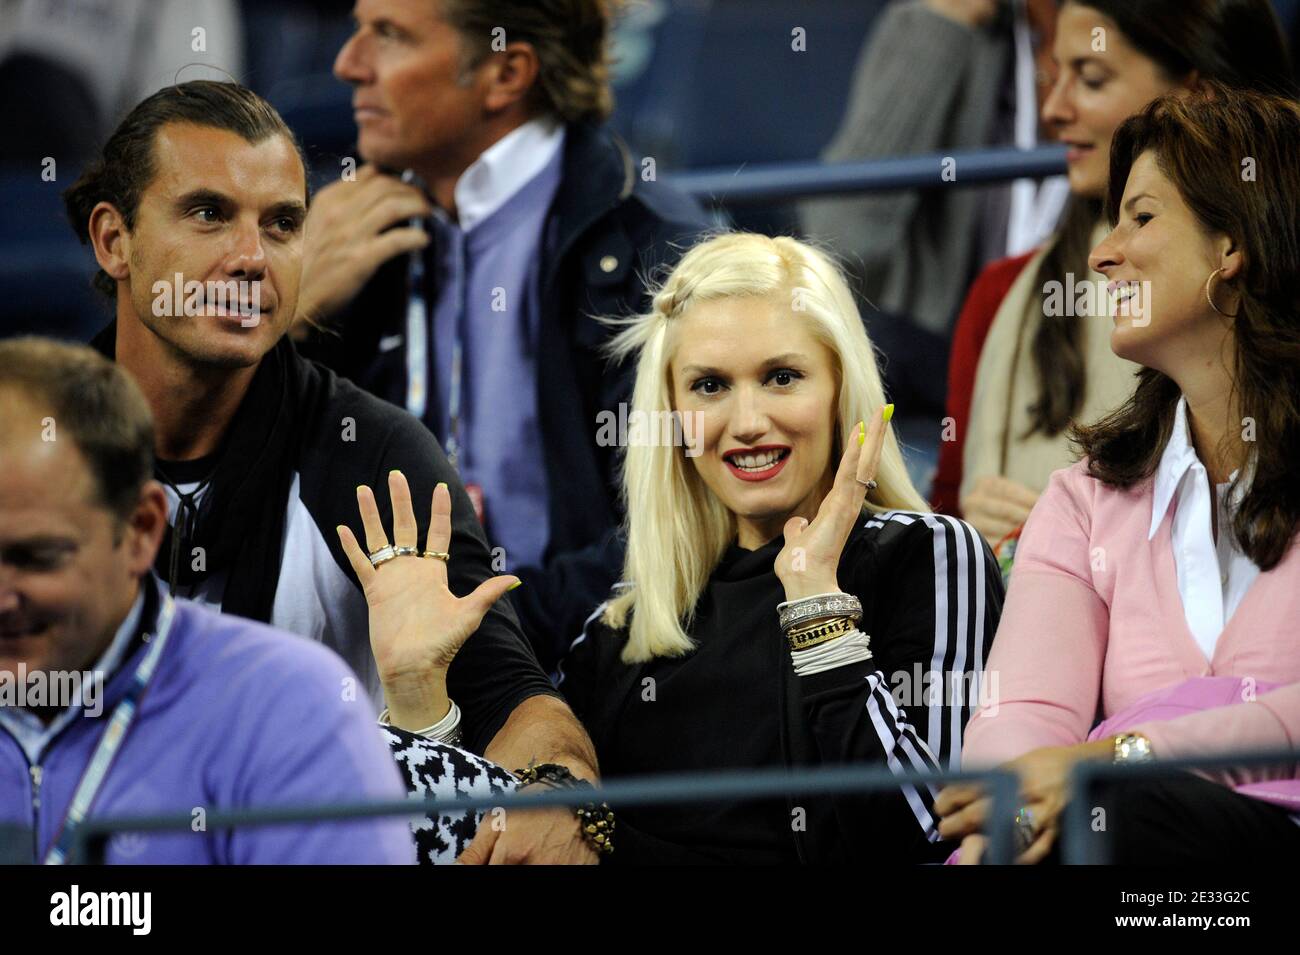 Gwen Stefani and Gavin Rossdale during day eight of the US Open, at Flushing Meadows, New York, USA on September 6, 2010. Photo by Mehdi Taamallah/ABACAPRESS.COM Stock Photo